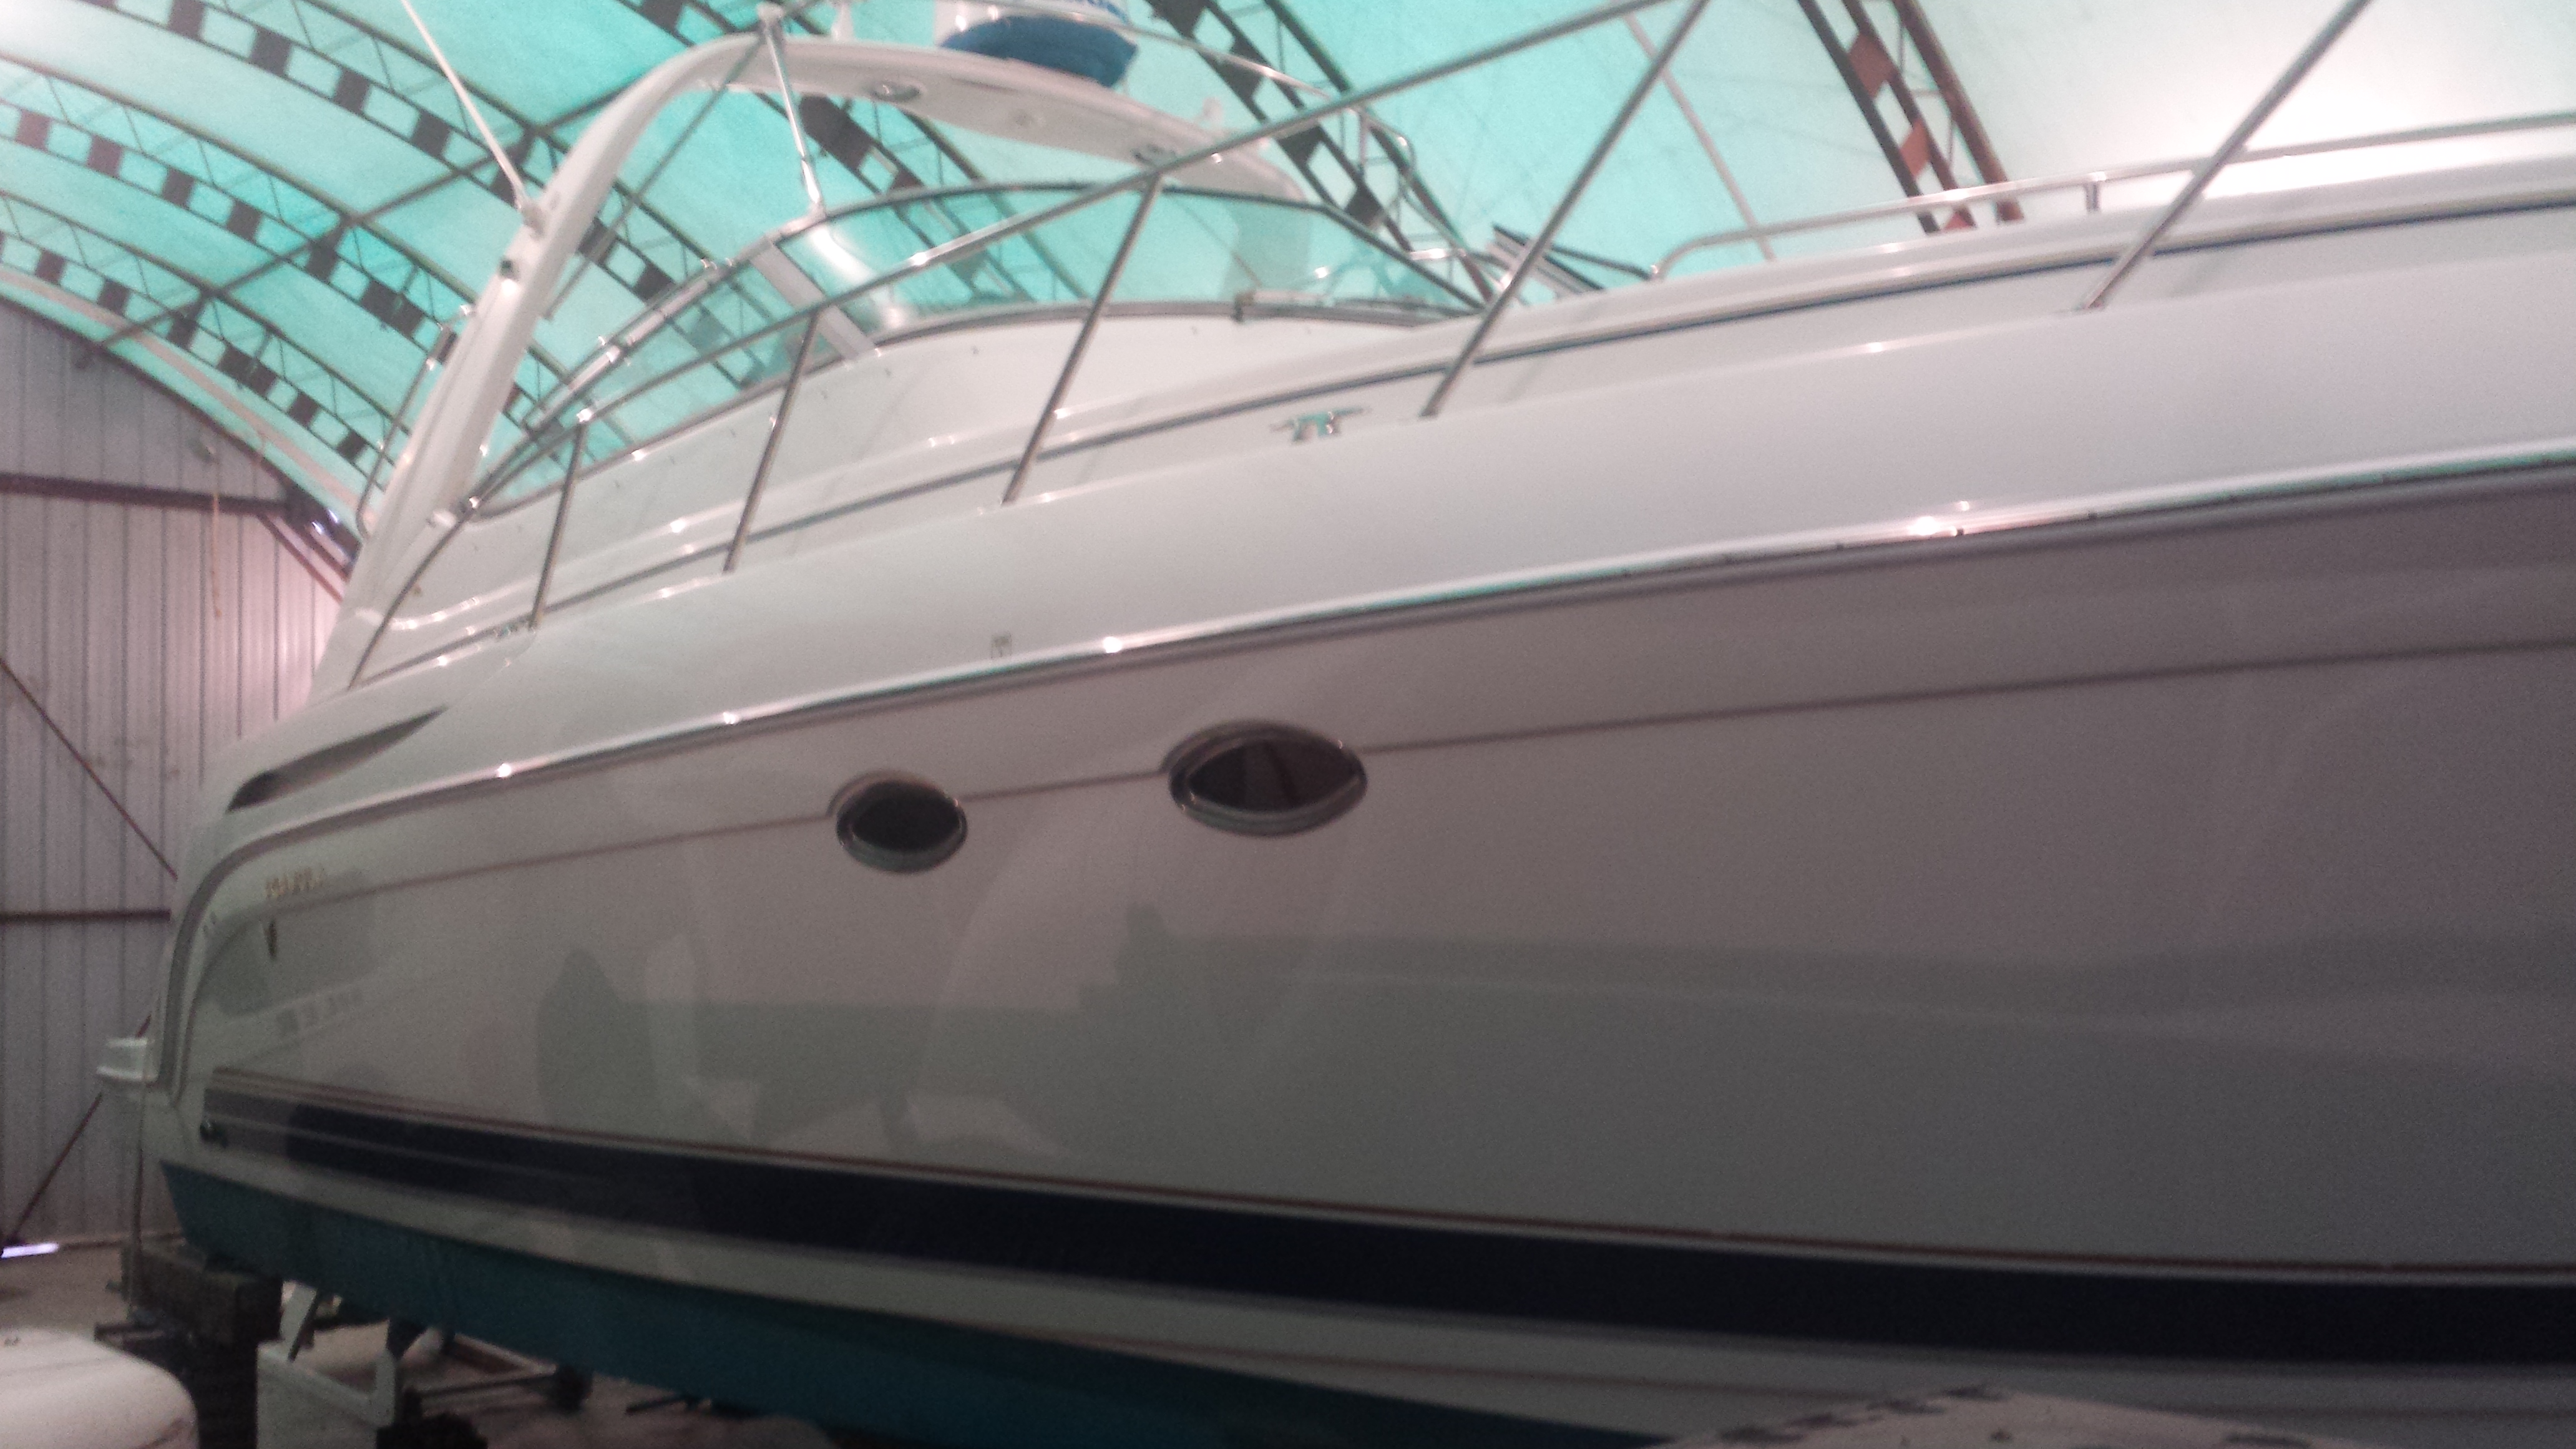 Complete boat / yacht painting and exterior refinishing at Lynwood Marina in North Vancouver for a Richmond BC customer from MRV Marine Services.